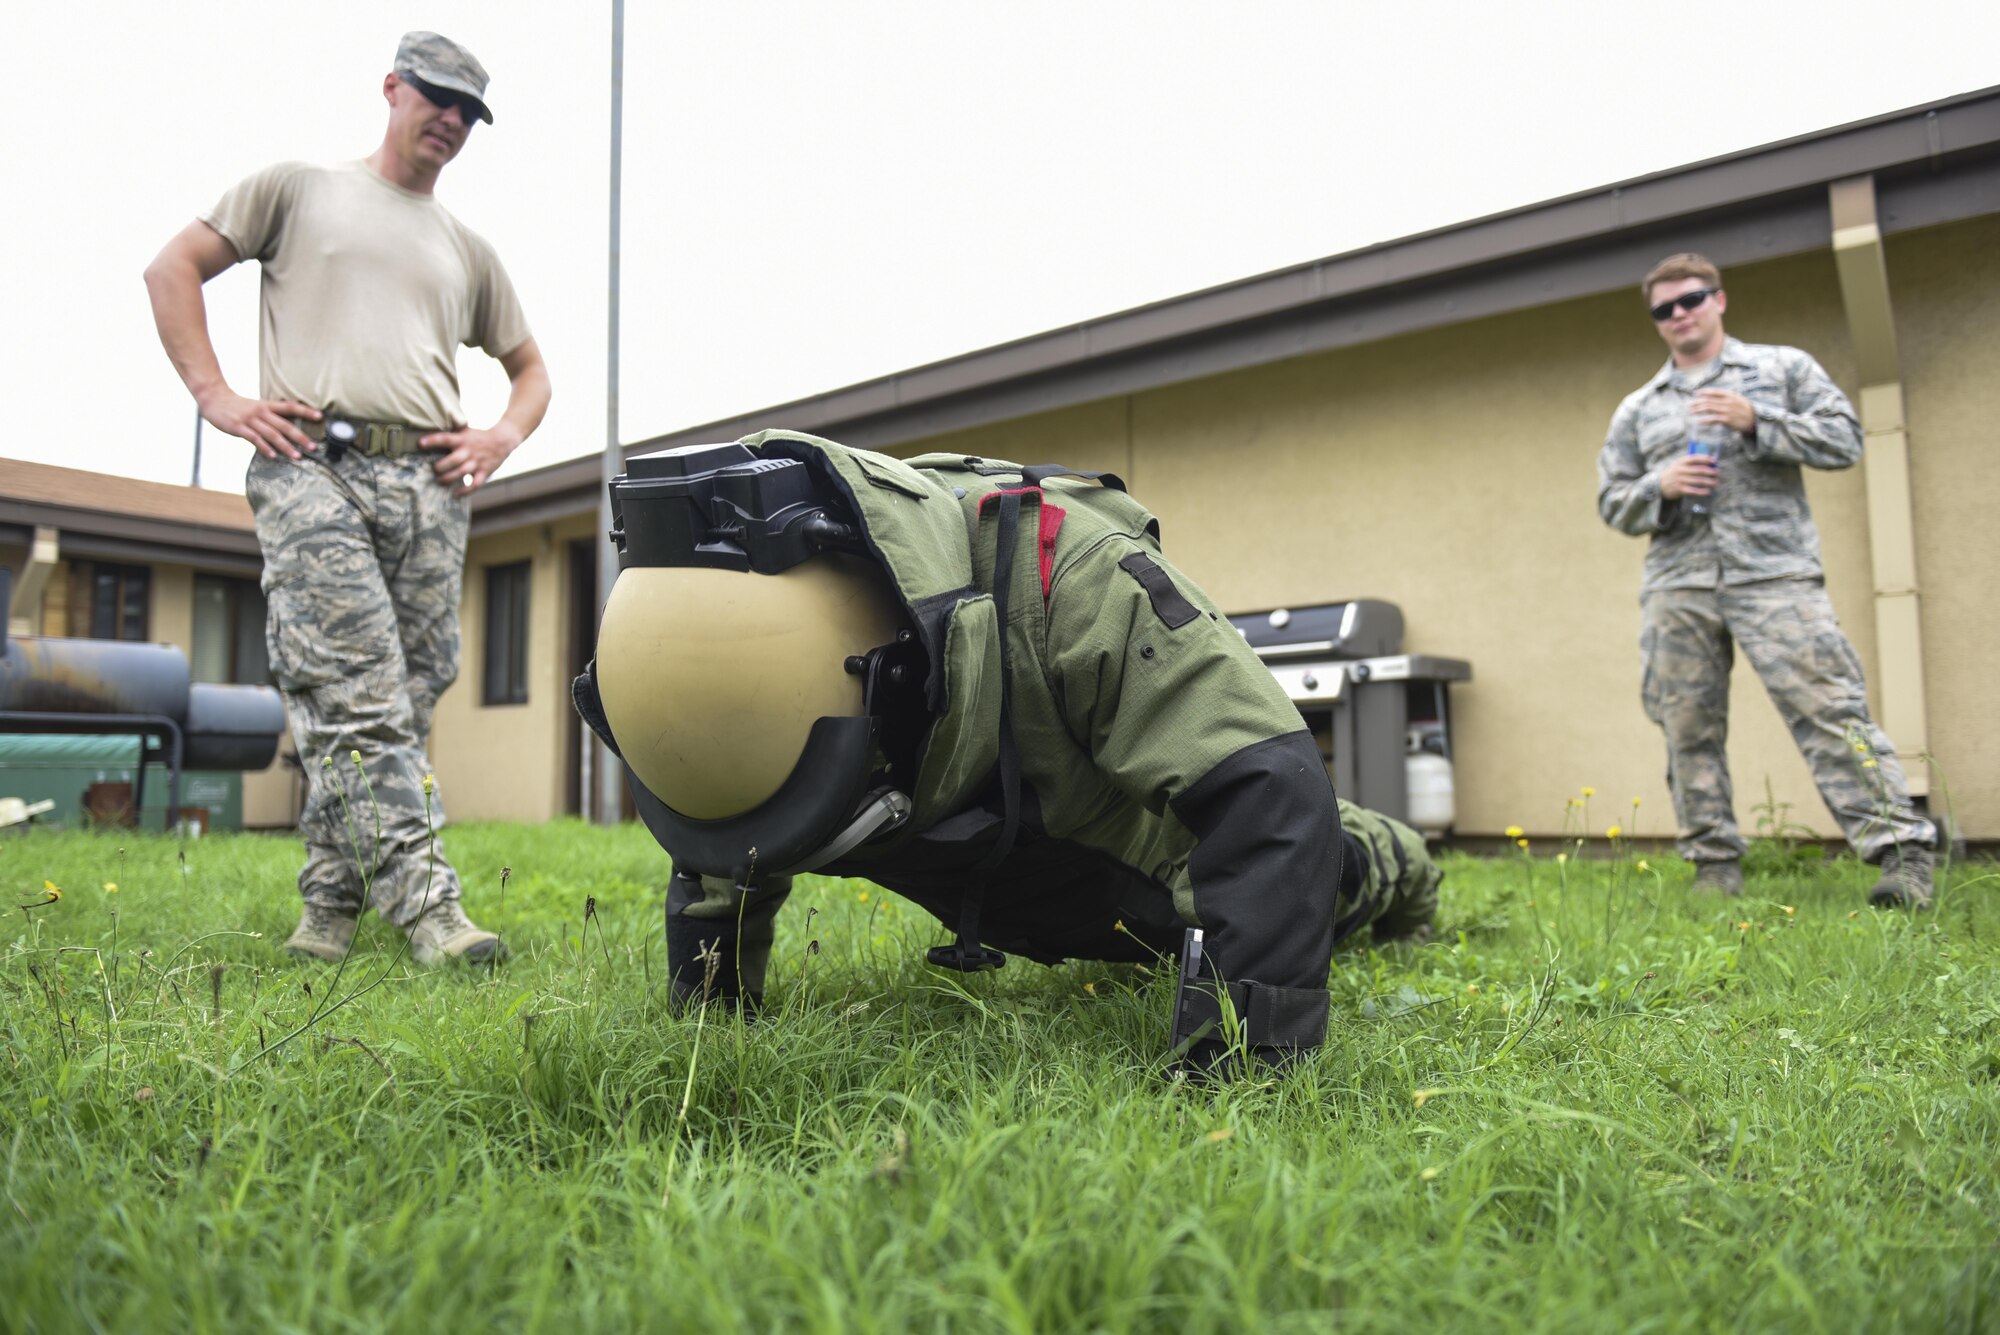 U.S. Air Force Academy Cadet 2nd Class Harry McMahon performs a push up in an explosive ordnance disposal suit at Kunsan Air Base, Republic of Korea, July 11, 2017 while U.S. Air Force E.O.D. members observe him during the cadet’s immersion visit. The visit was part of the Air Force Academy’s Operation Air Force program. Operation Air Force which takes rising juniors in the Air Force Academy to different bases across the Air Force to shadow and learn about their respective missions. (U.S. Air Force photo by Senior Airman Michael Hunsaker/Released) 